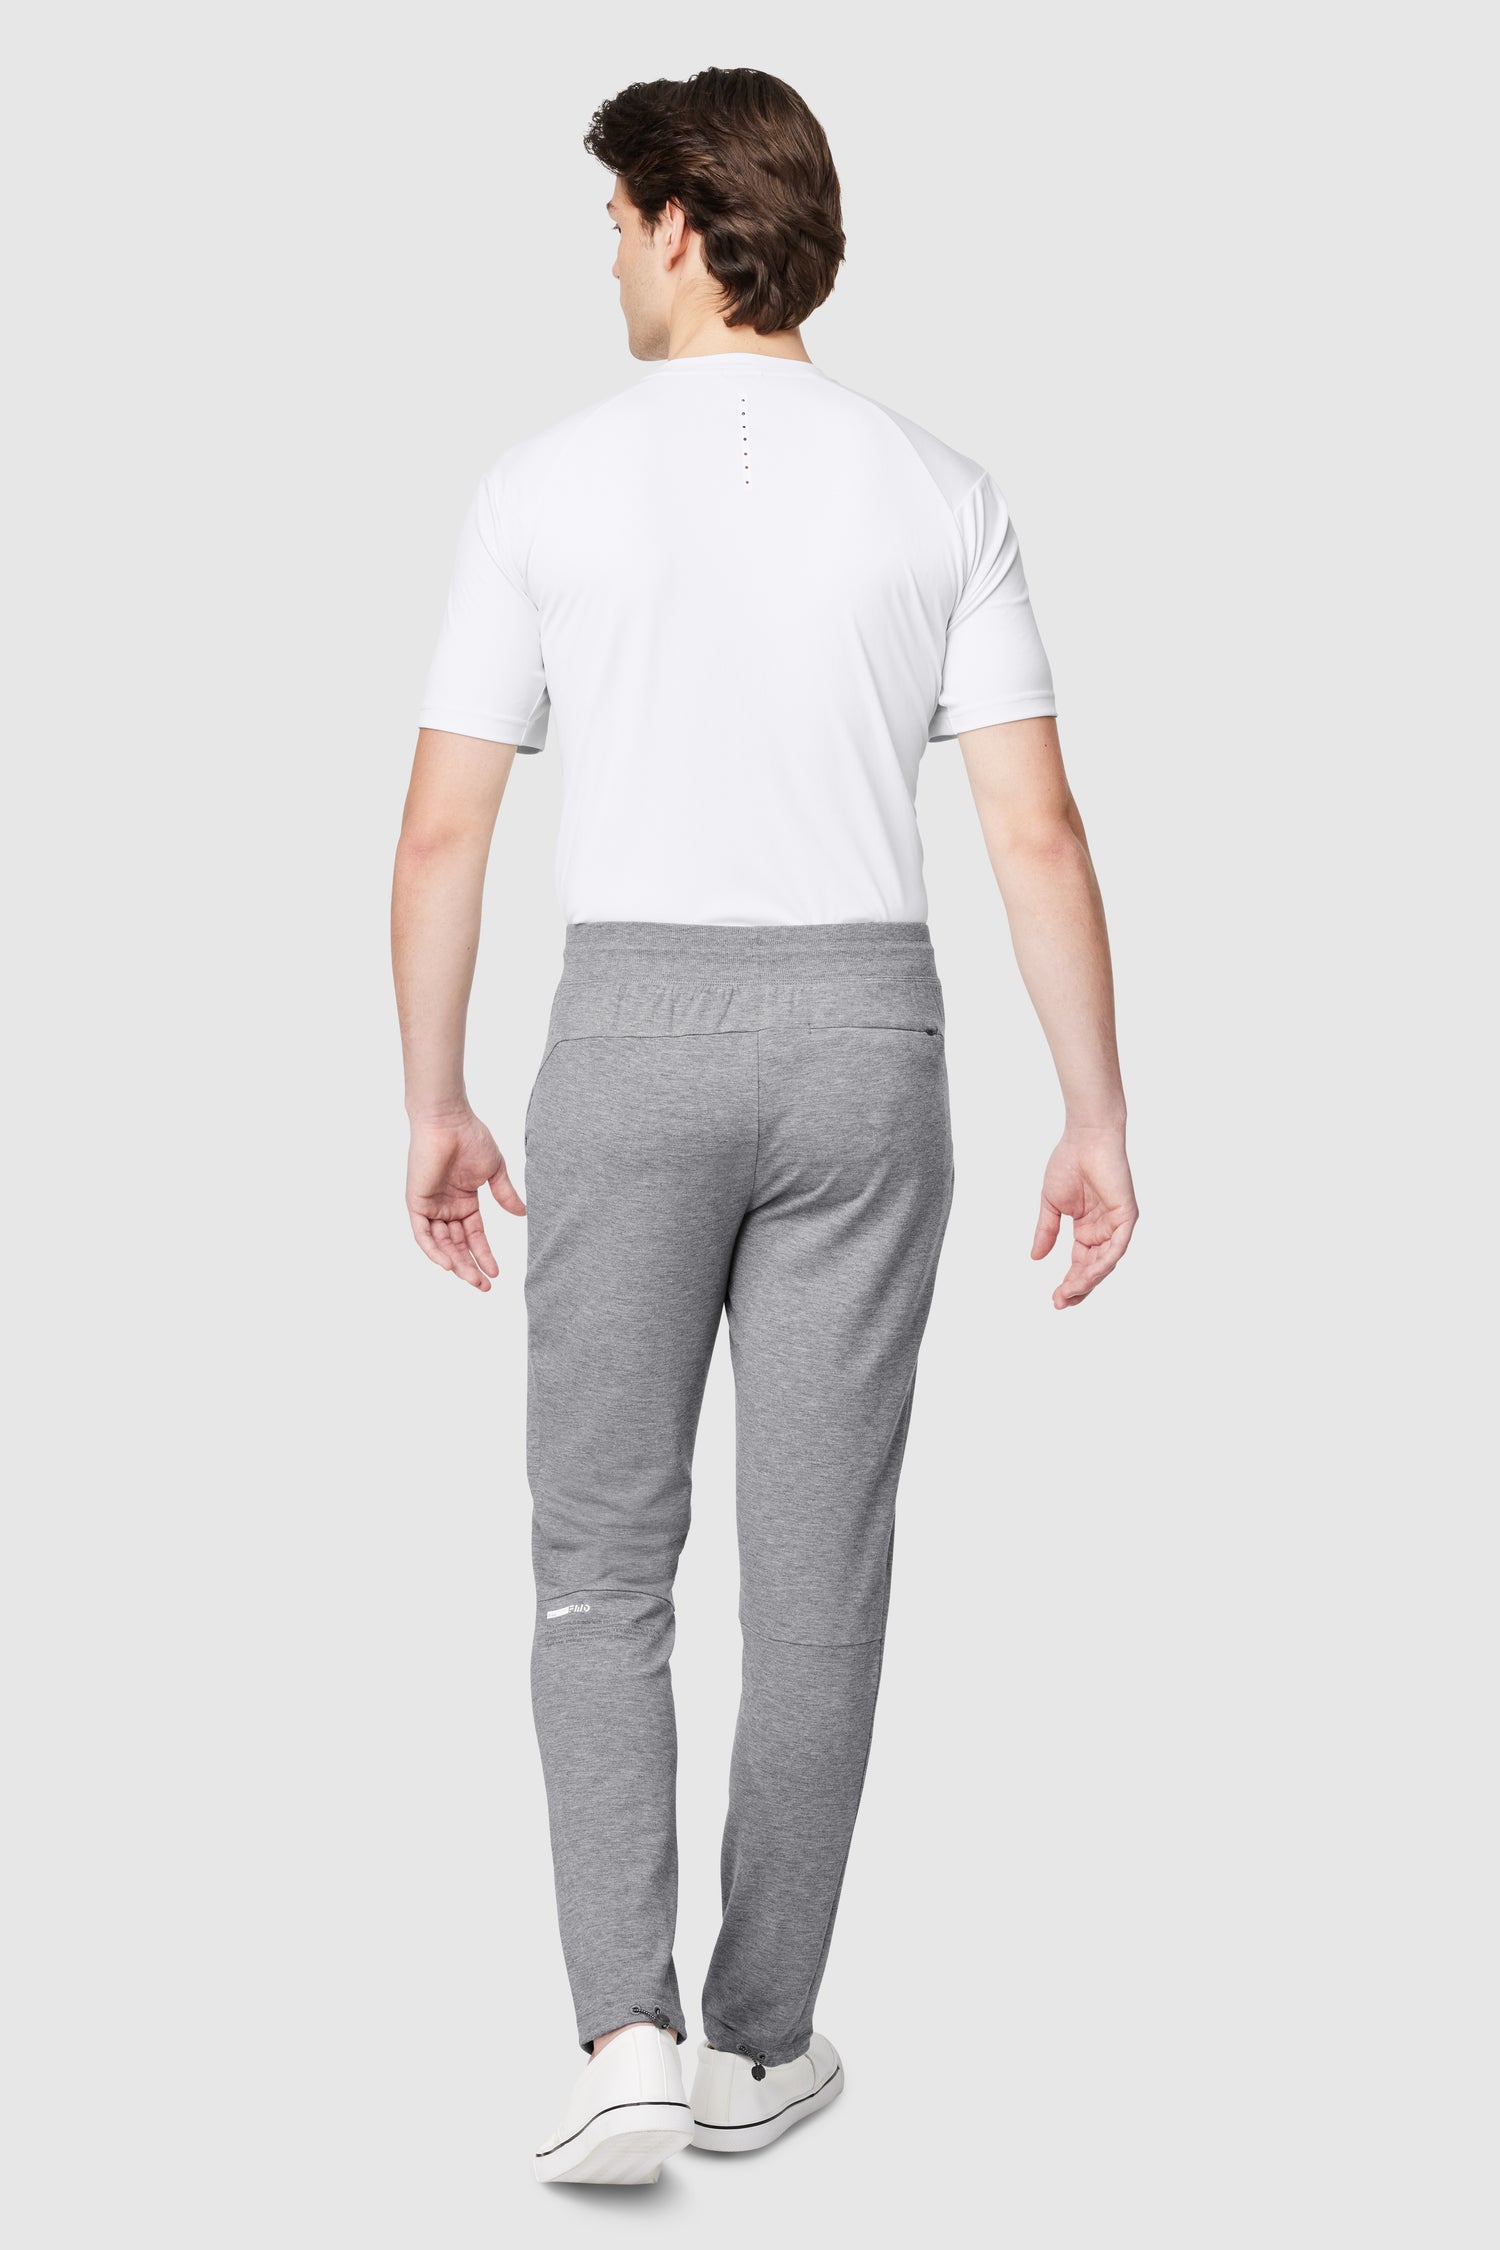 Free FWD Men's Terry Jogger - BEST SELLING